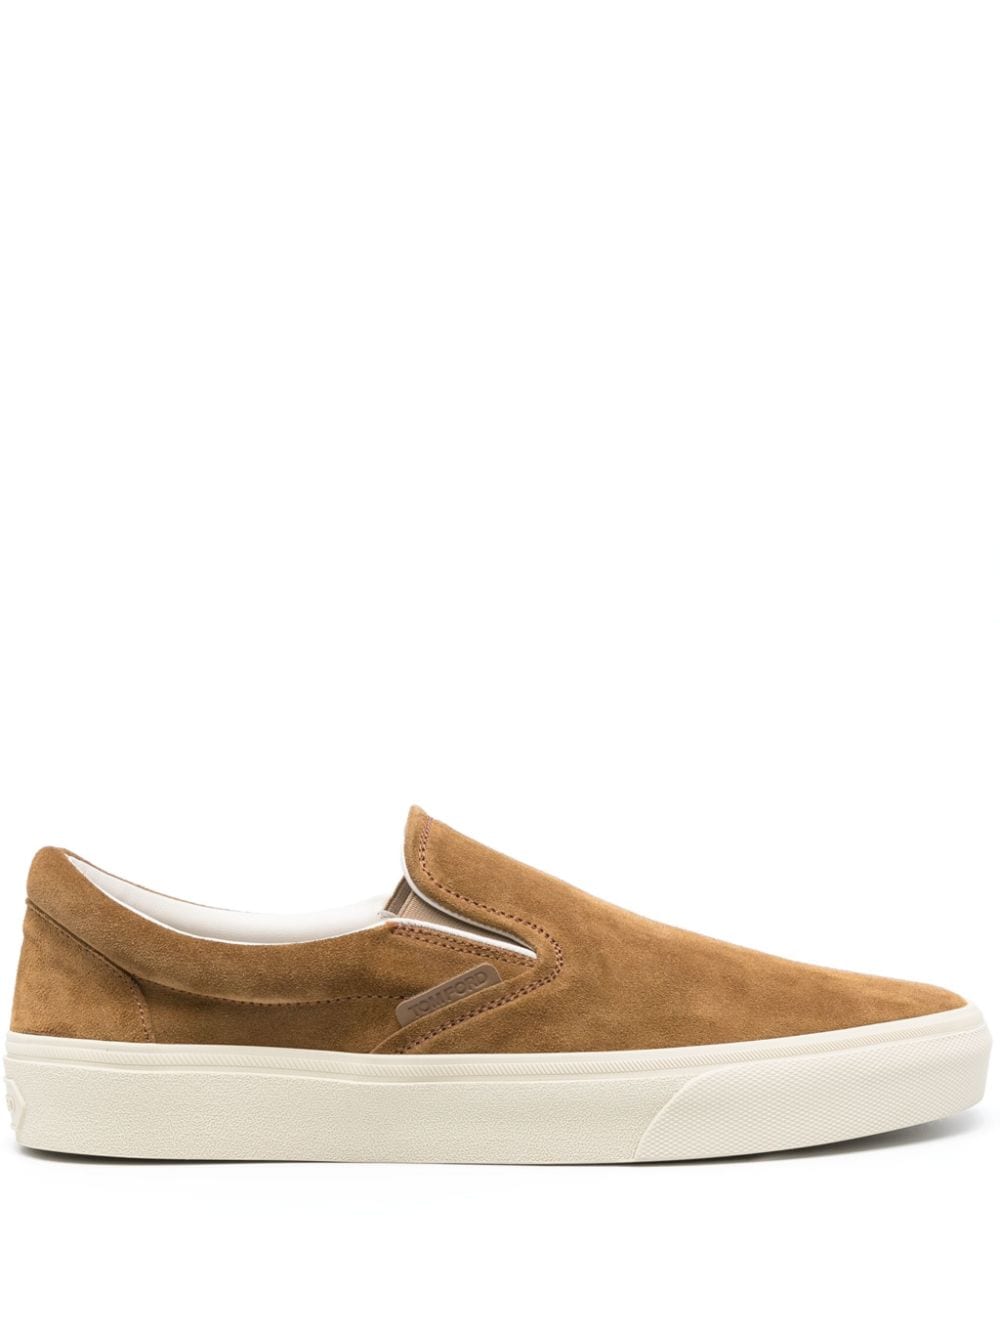 TOM FORD Jude slip-on suede sneakers - Brown von TOM FORD